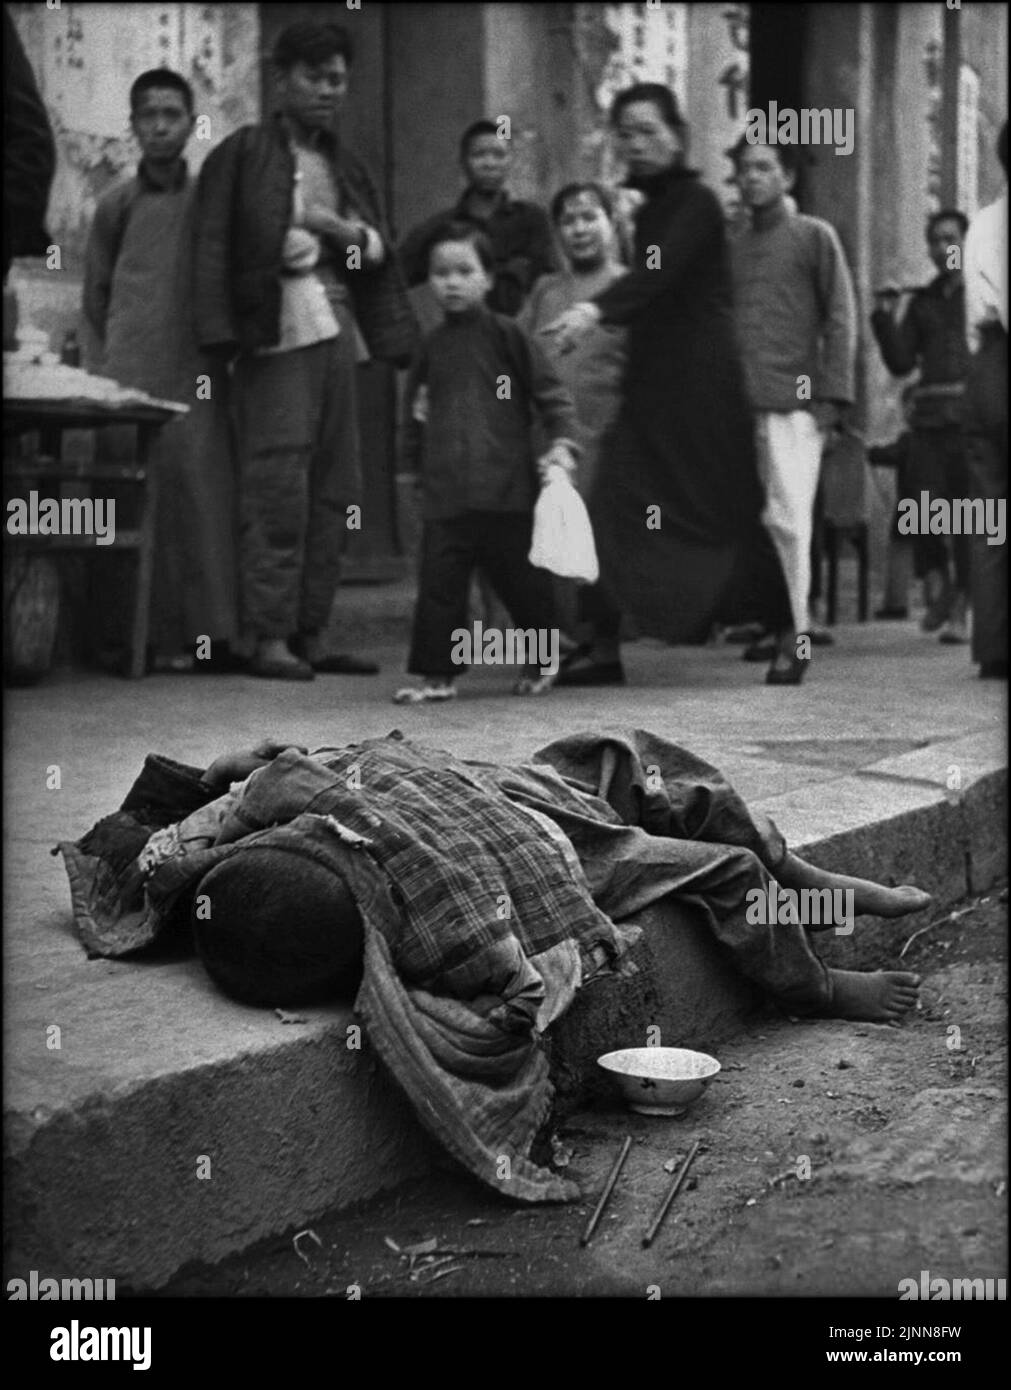 A harrowing image taken by George Silk, an abandoned child lying dying in thestreet while crowd looks on. The image was taken during the famine in China in 1946 Stock Photo